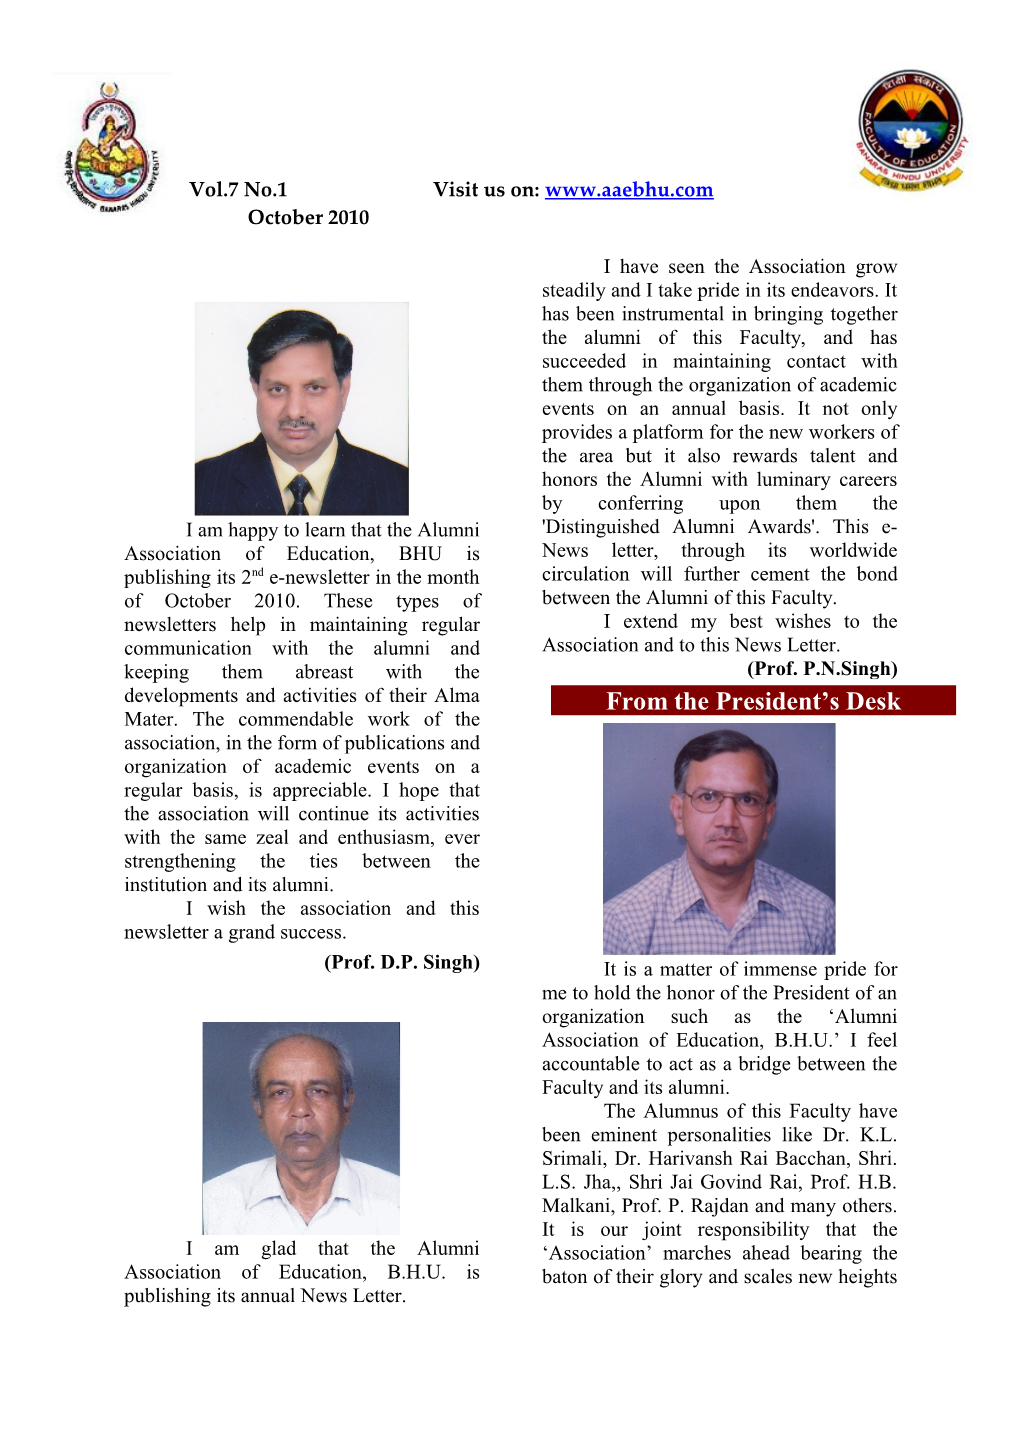 I Wish the Association and This Newsletter a Grand Success